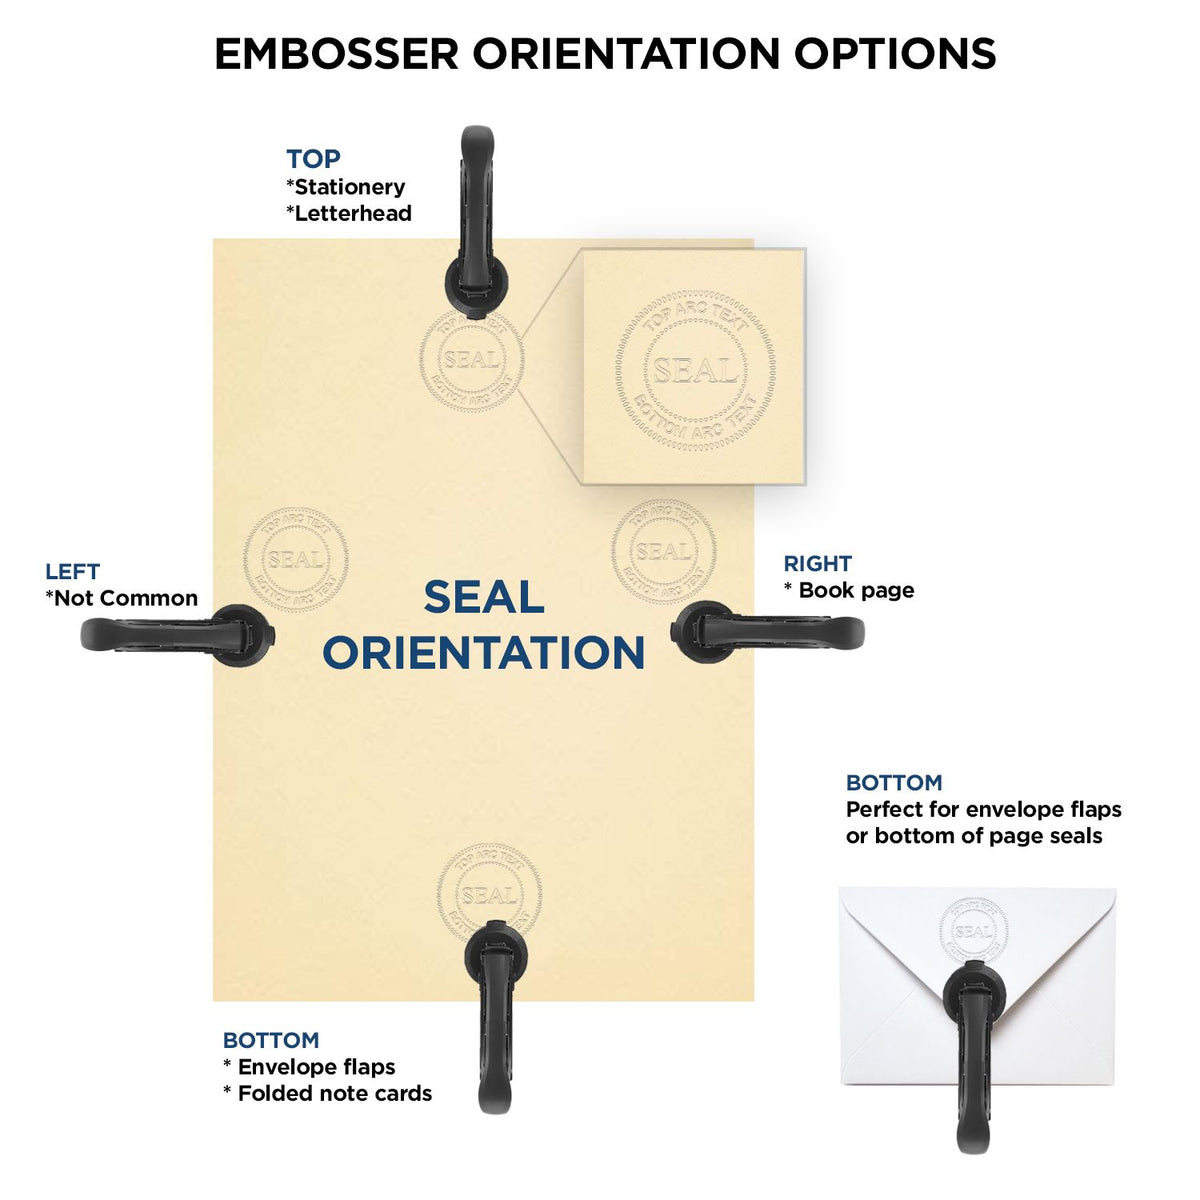 An infographic for the State of Tennessee Long Reach Architectural Embossing Seal showing embosser orientation, this is showing examples of a top, bottom, right and left insert.